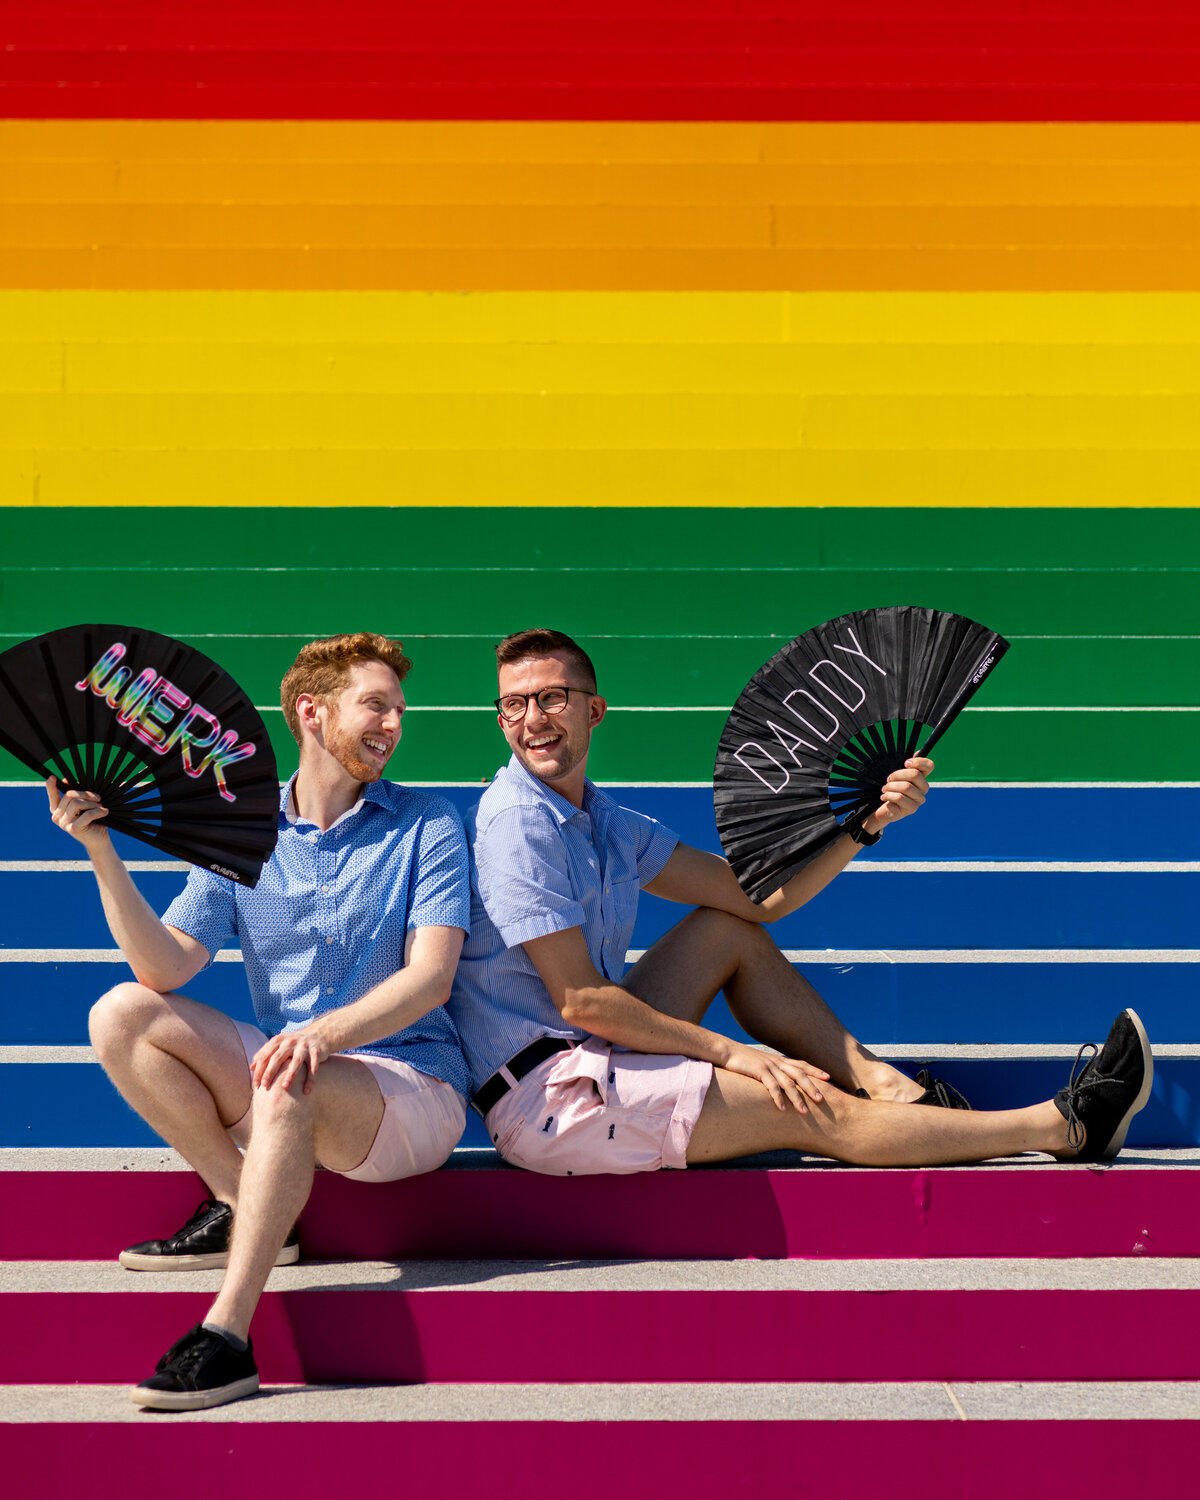 A couple sitting on a rainbow staircase holding decorative fans.